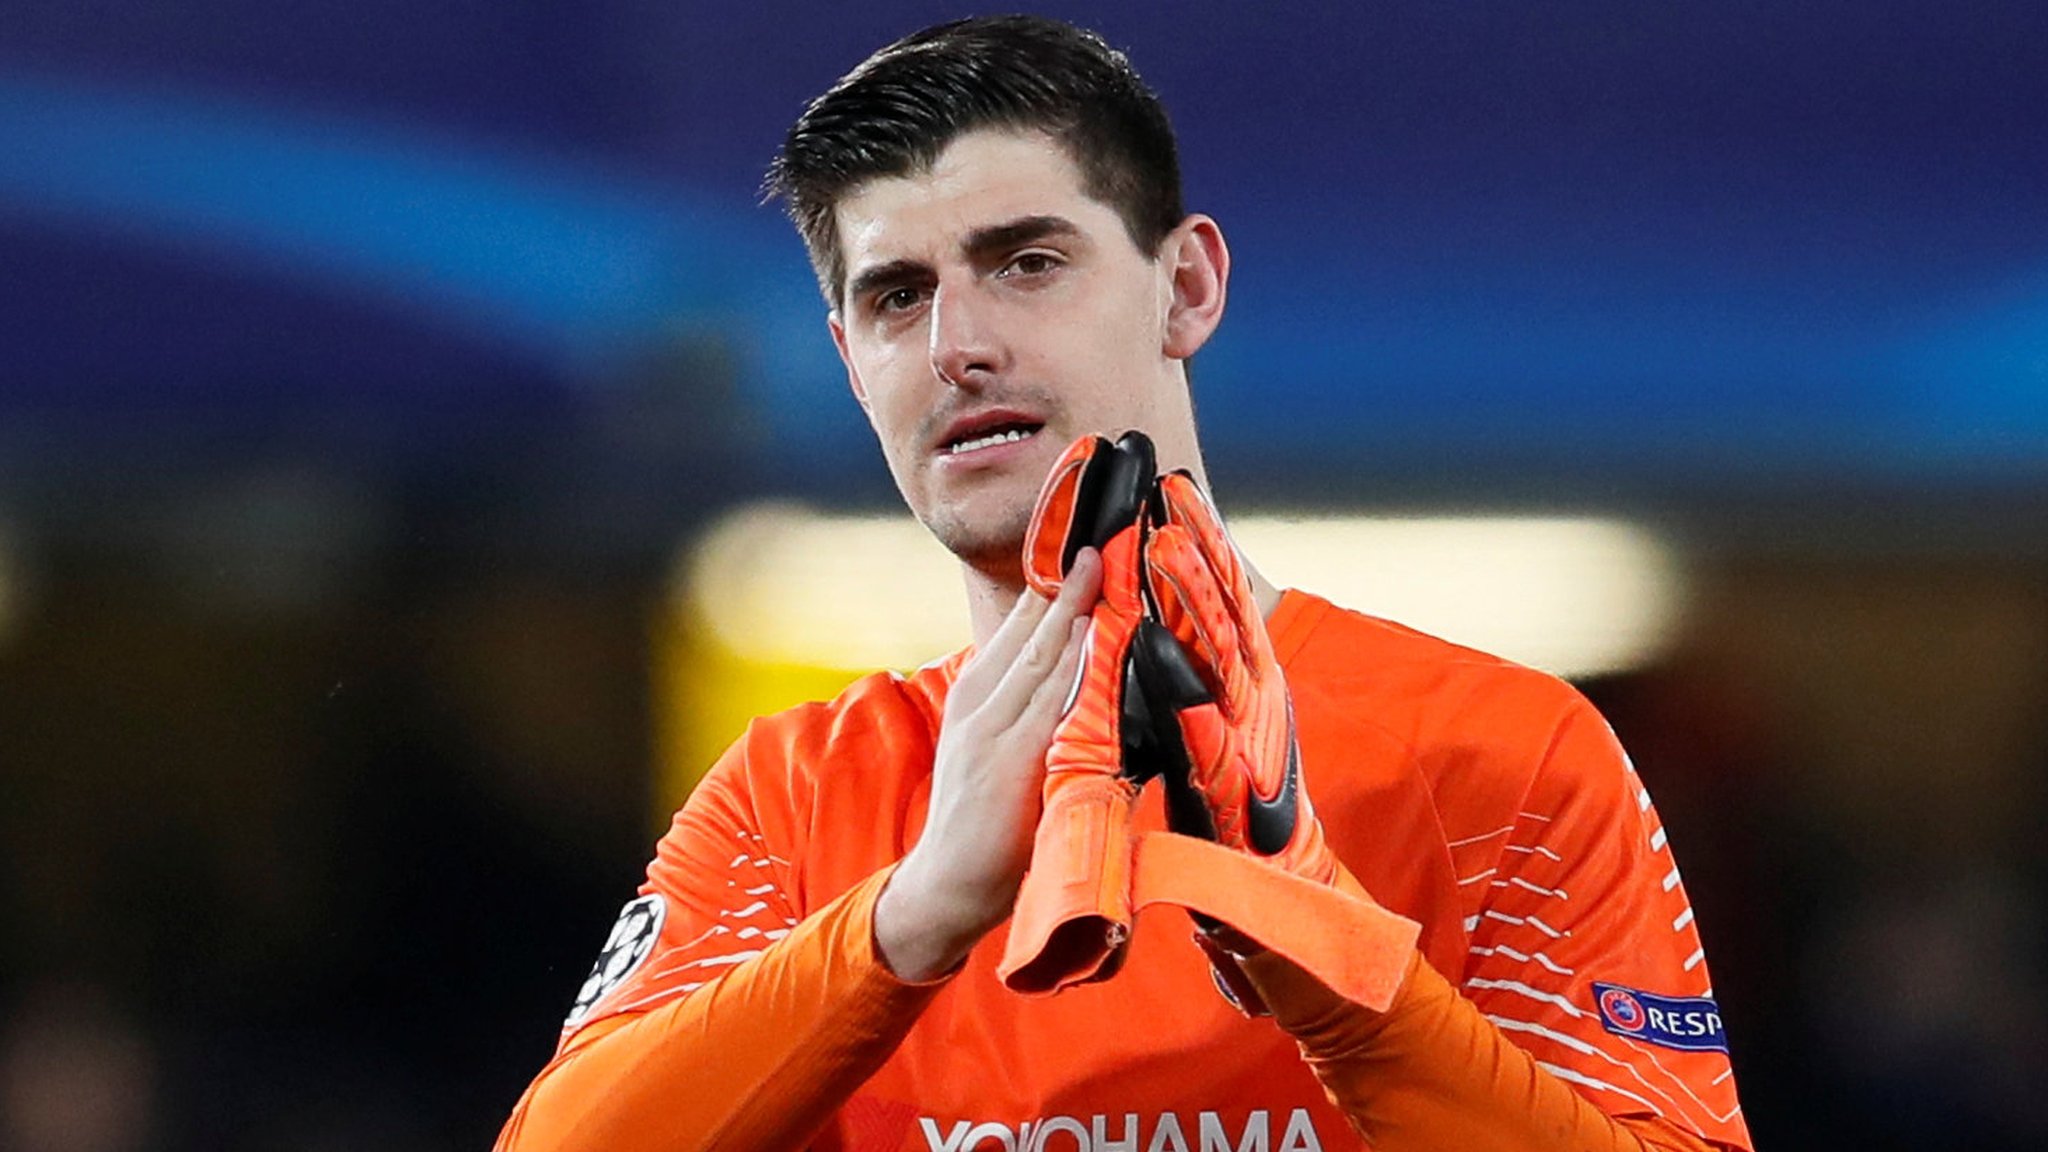 Real Madrid want Chelsea keeper Courtois - Thursday's gossip